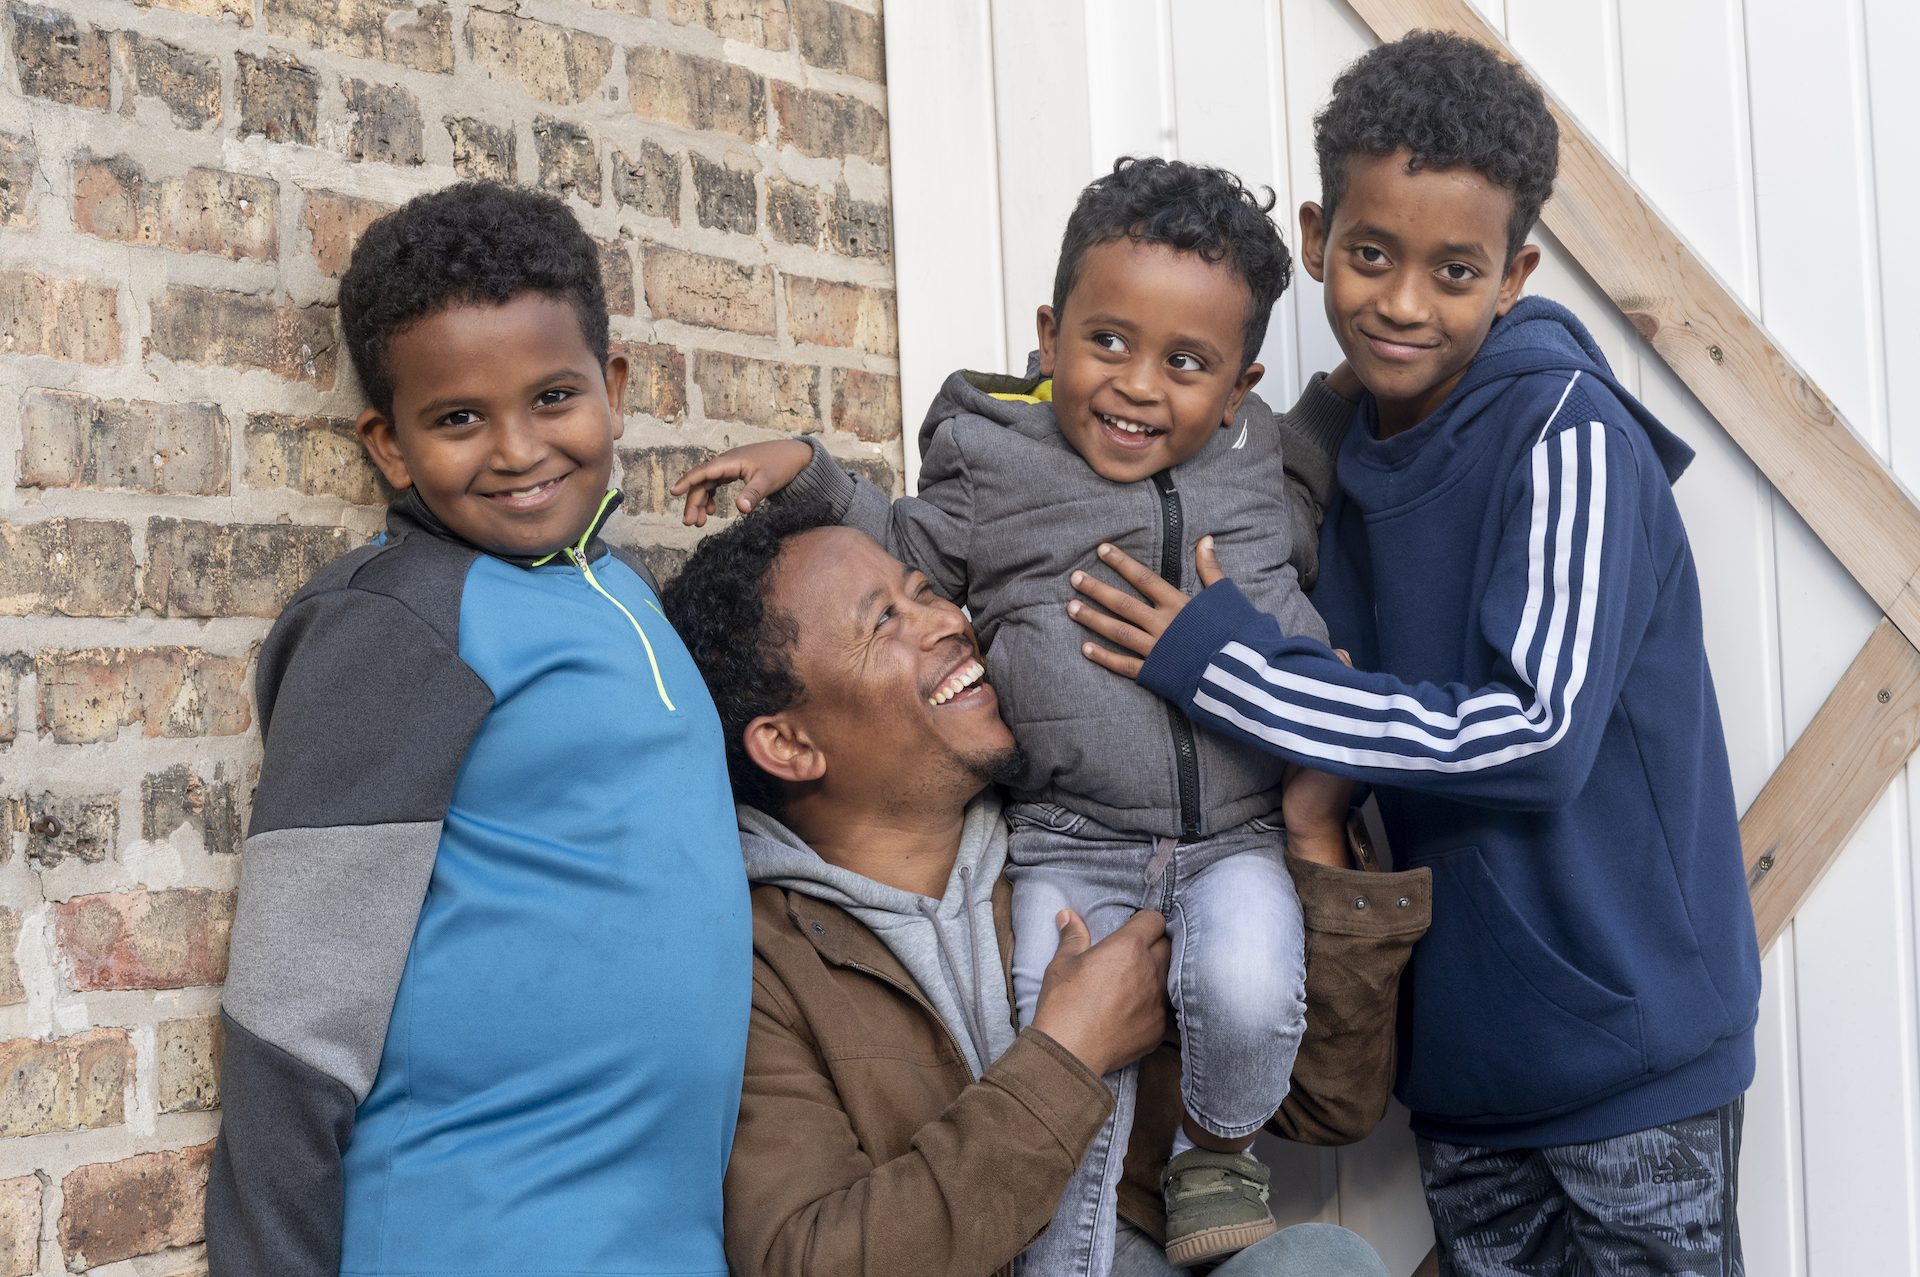 A Eritrean man poses for a photo with his three sons in the Rogers Park neighborhood in Chicago.